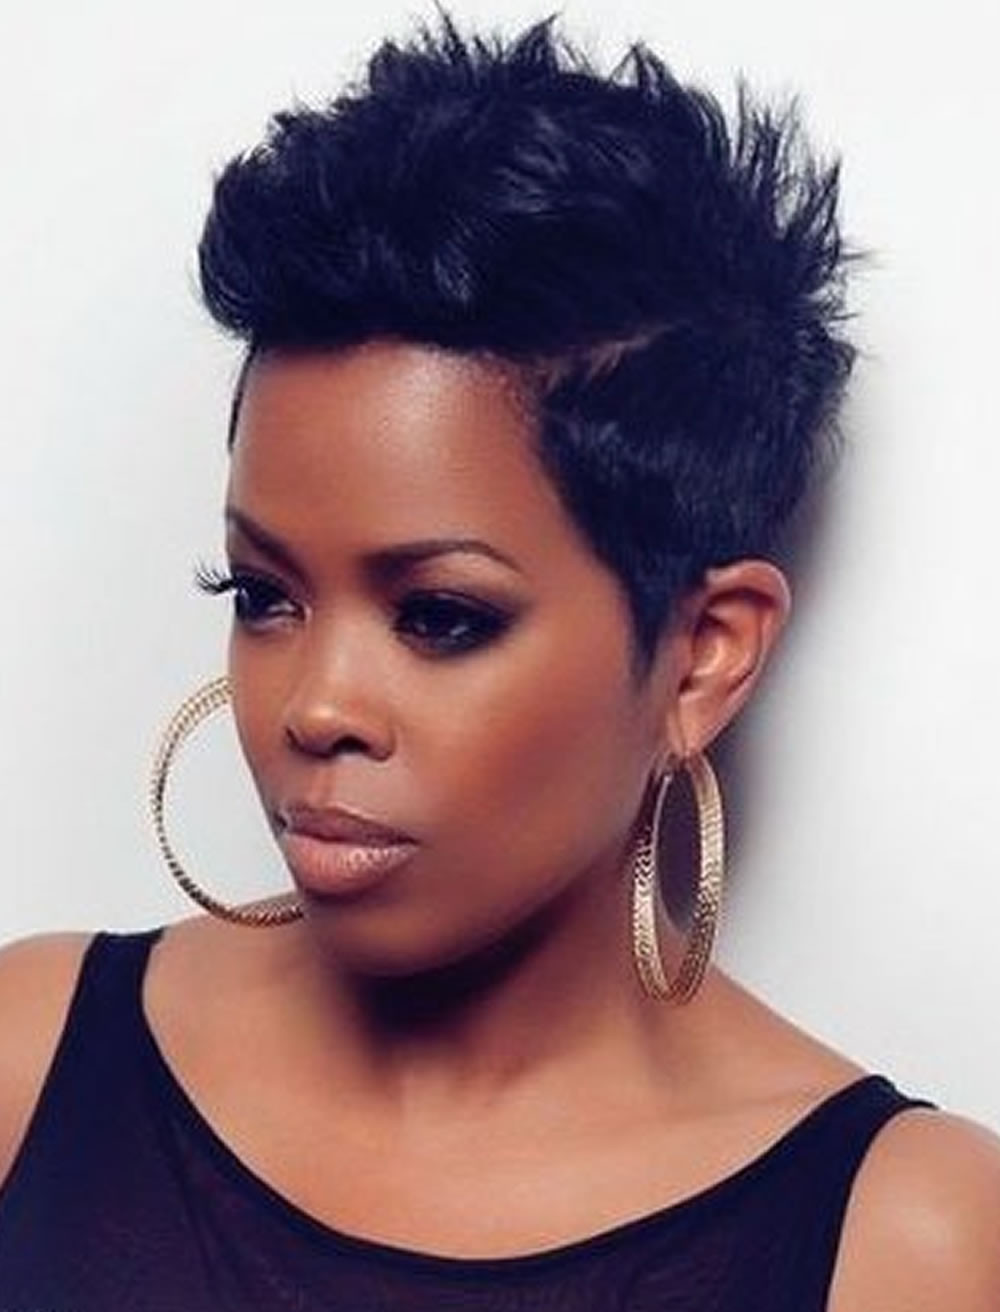 Black Woman Hairstyles
 Pixie Short Hairstyles for Black Women 2018 2019 – HAIRSTYLES